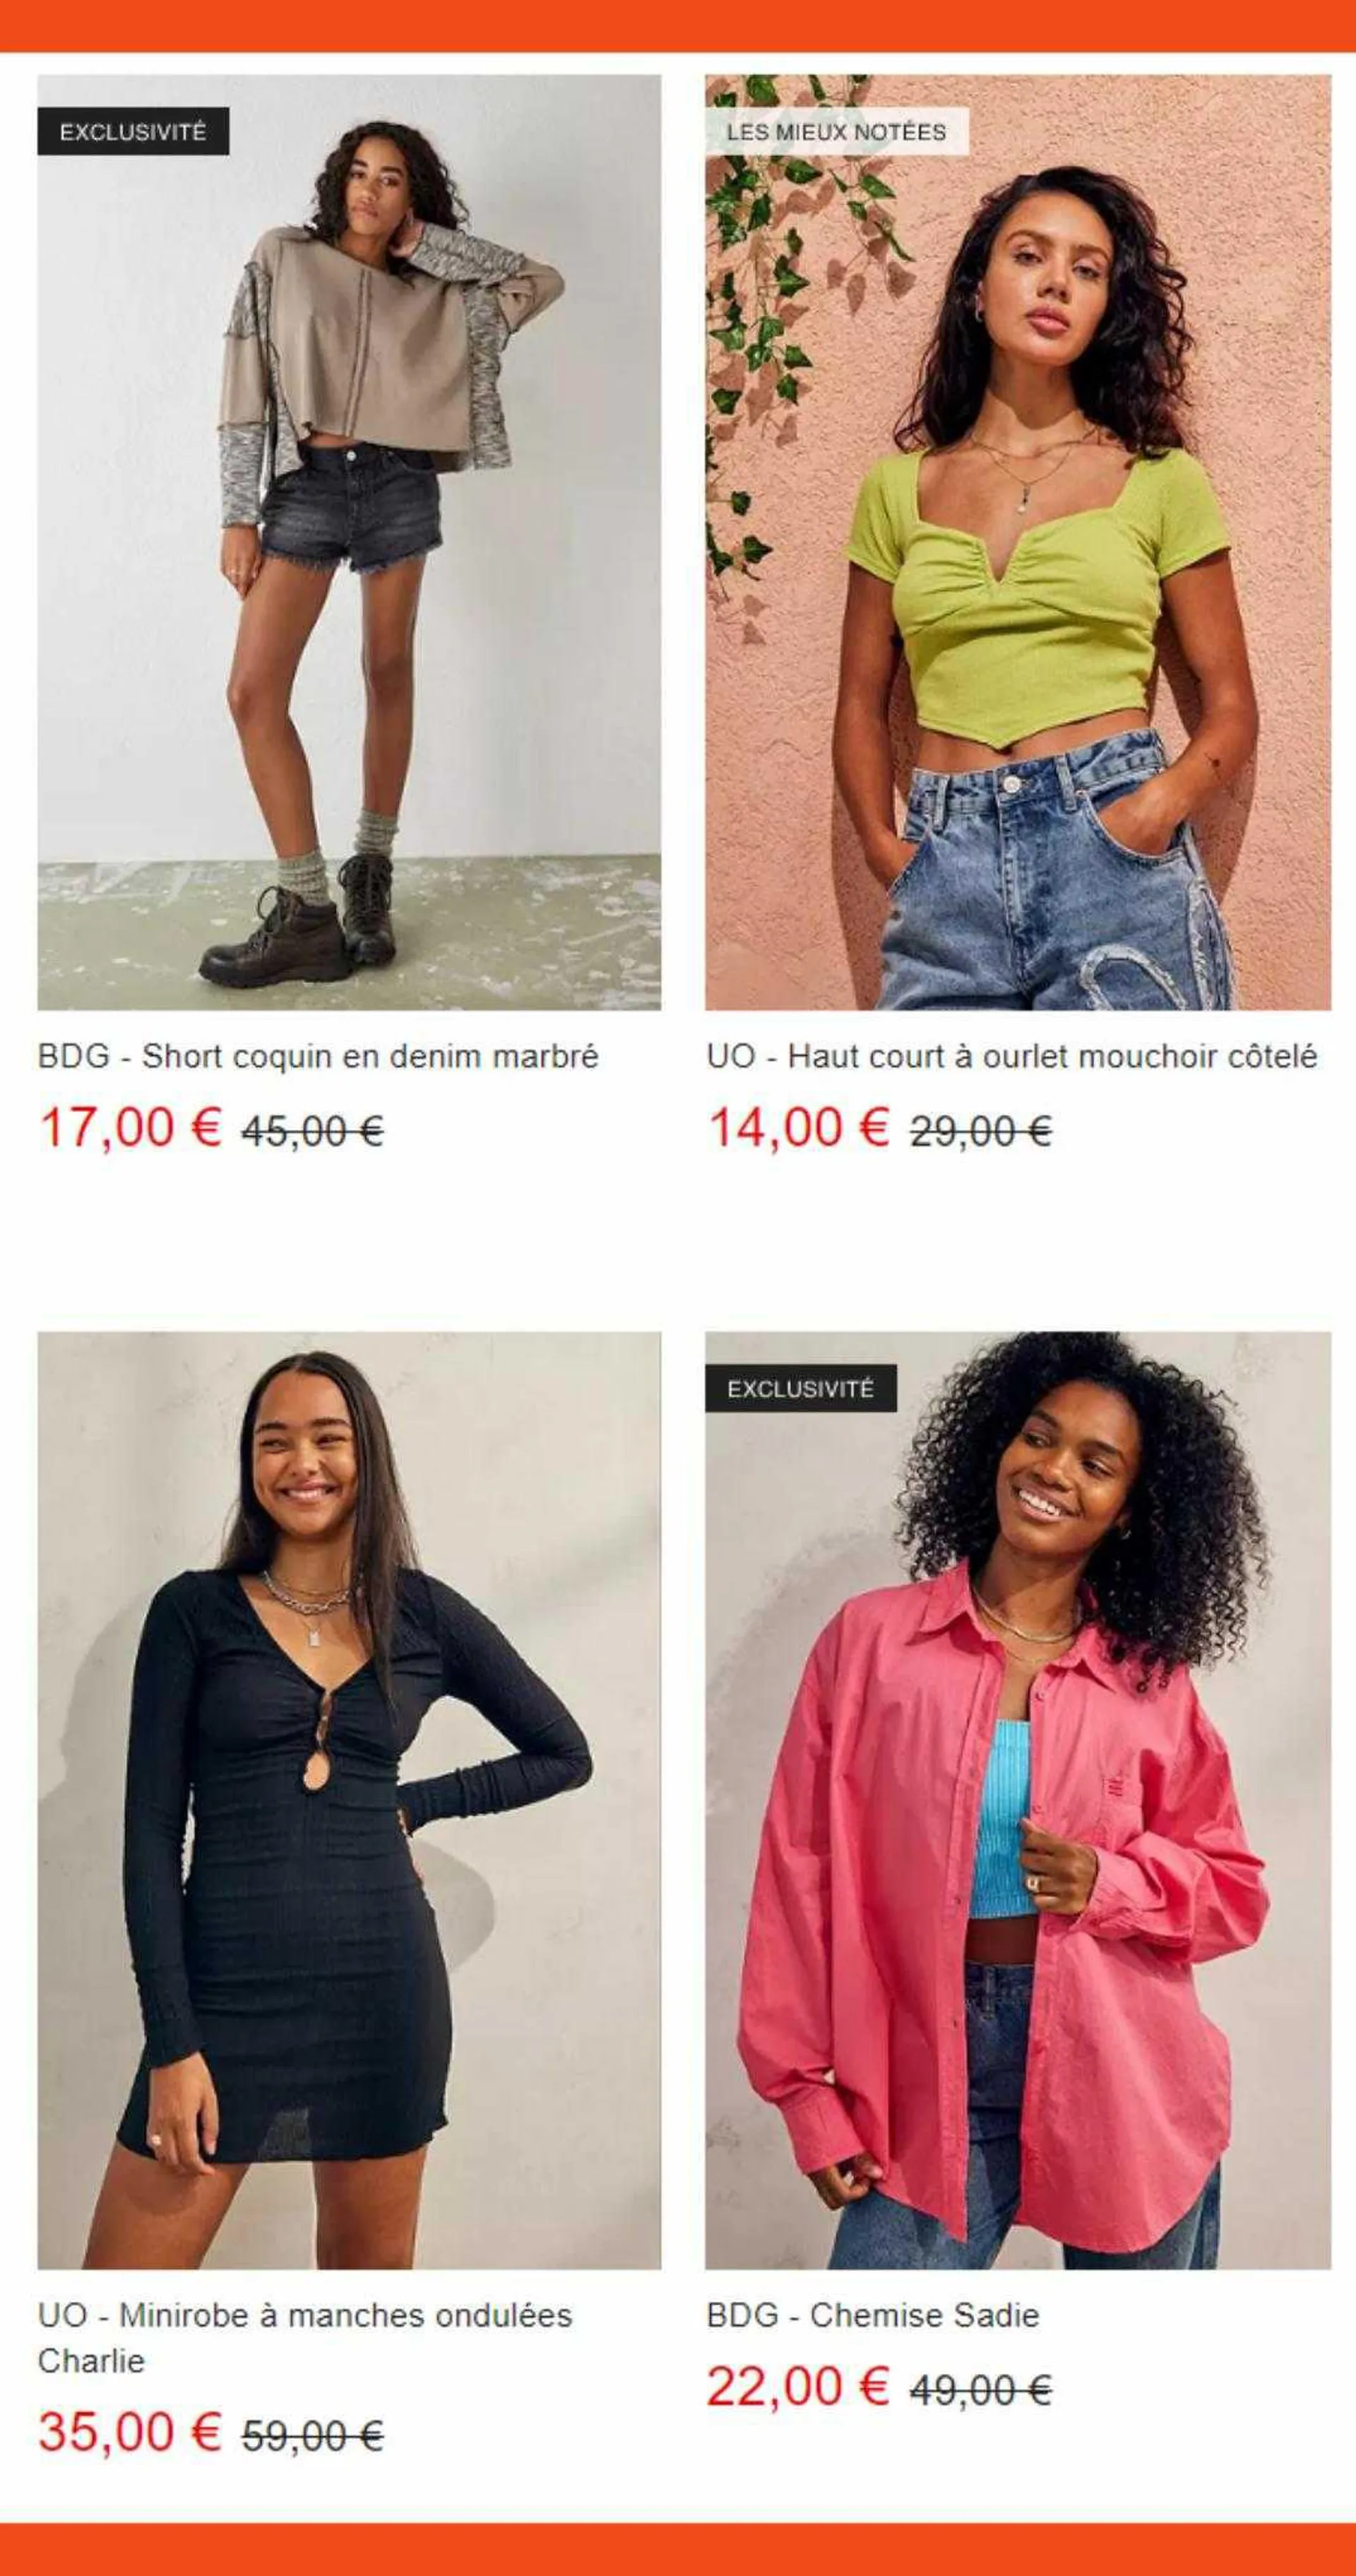 Catalogue Urban Outfitters - 4